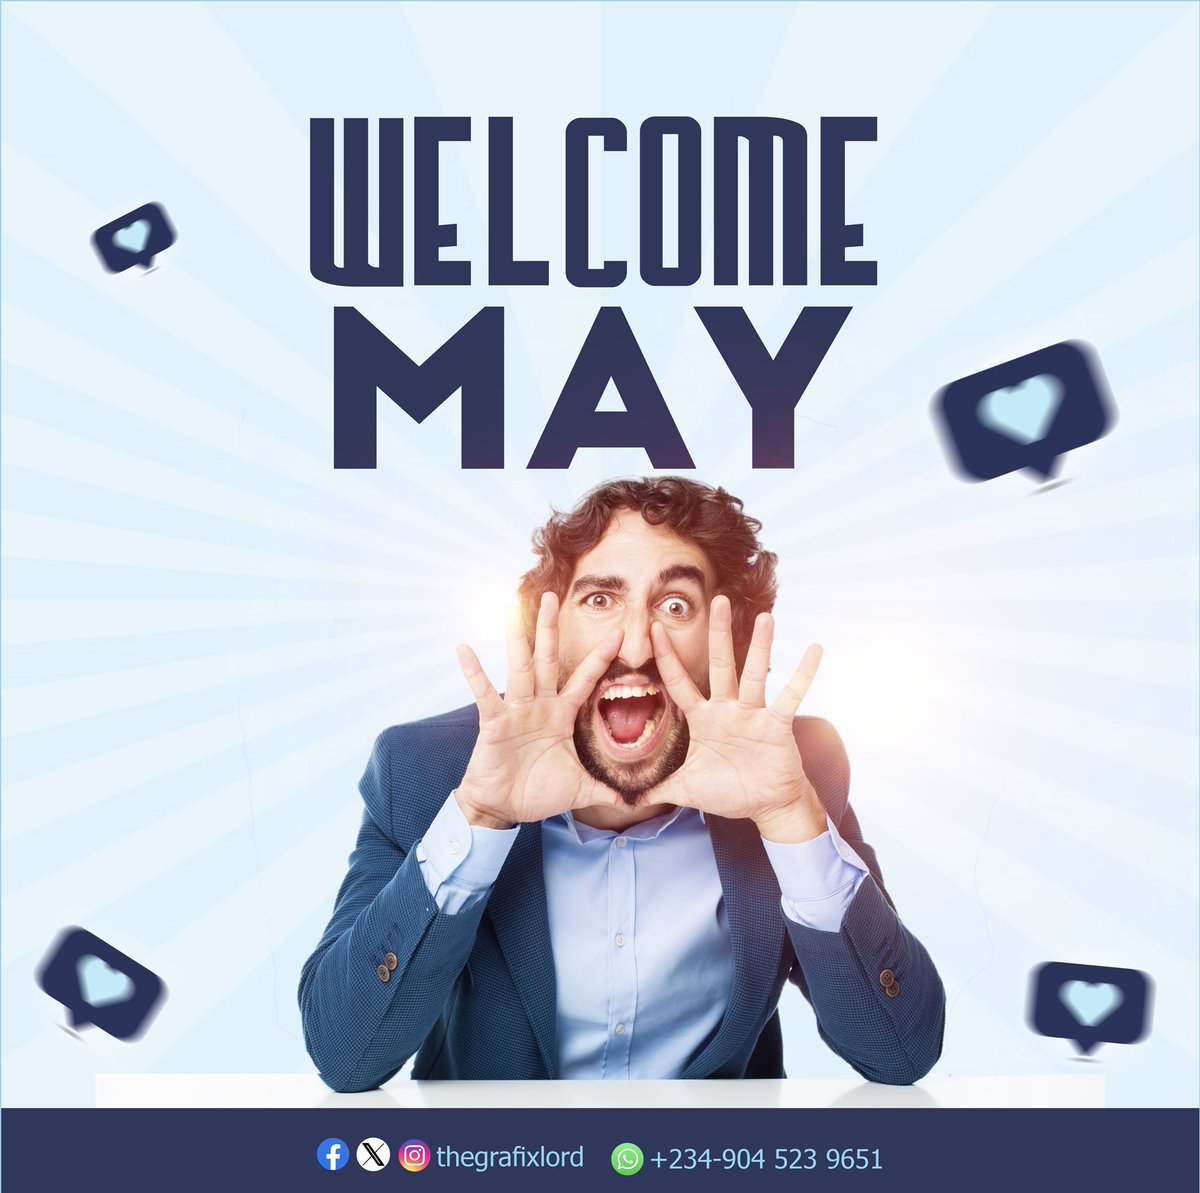 Happy May, everyone! May this new month bring you joy, peace, and success in all your endeavors. Let’s make this month a memorable one, together!

#happy #happynewmonth #may #newmonth #blessed #design #creative #freelance #freelancelife #designer